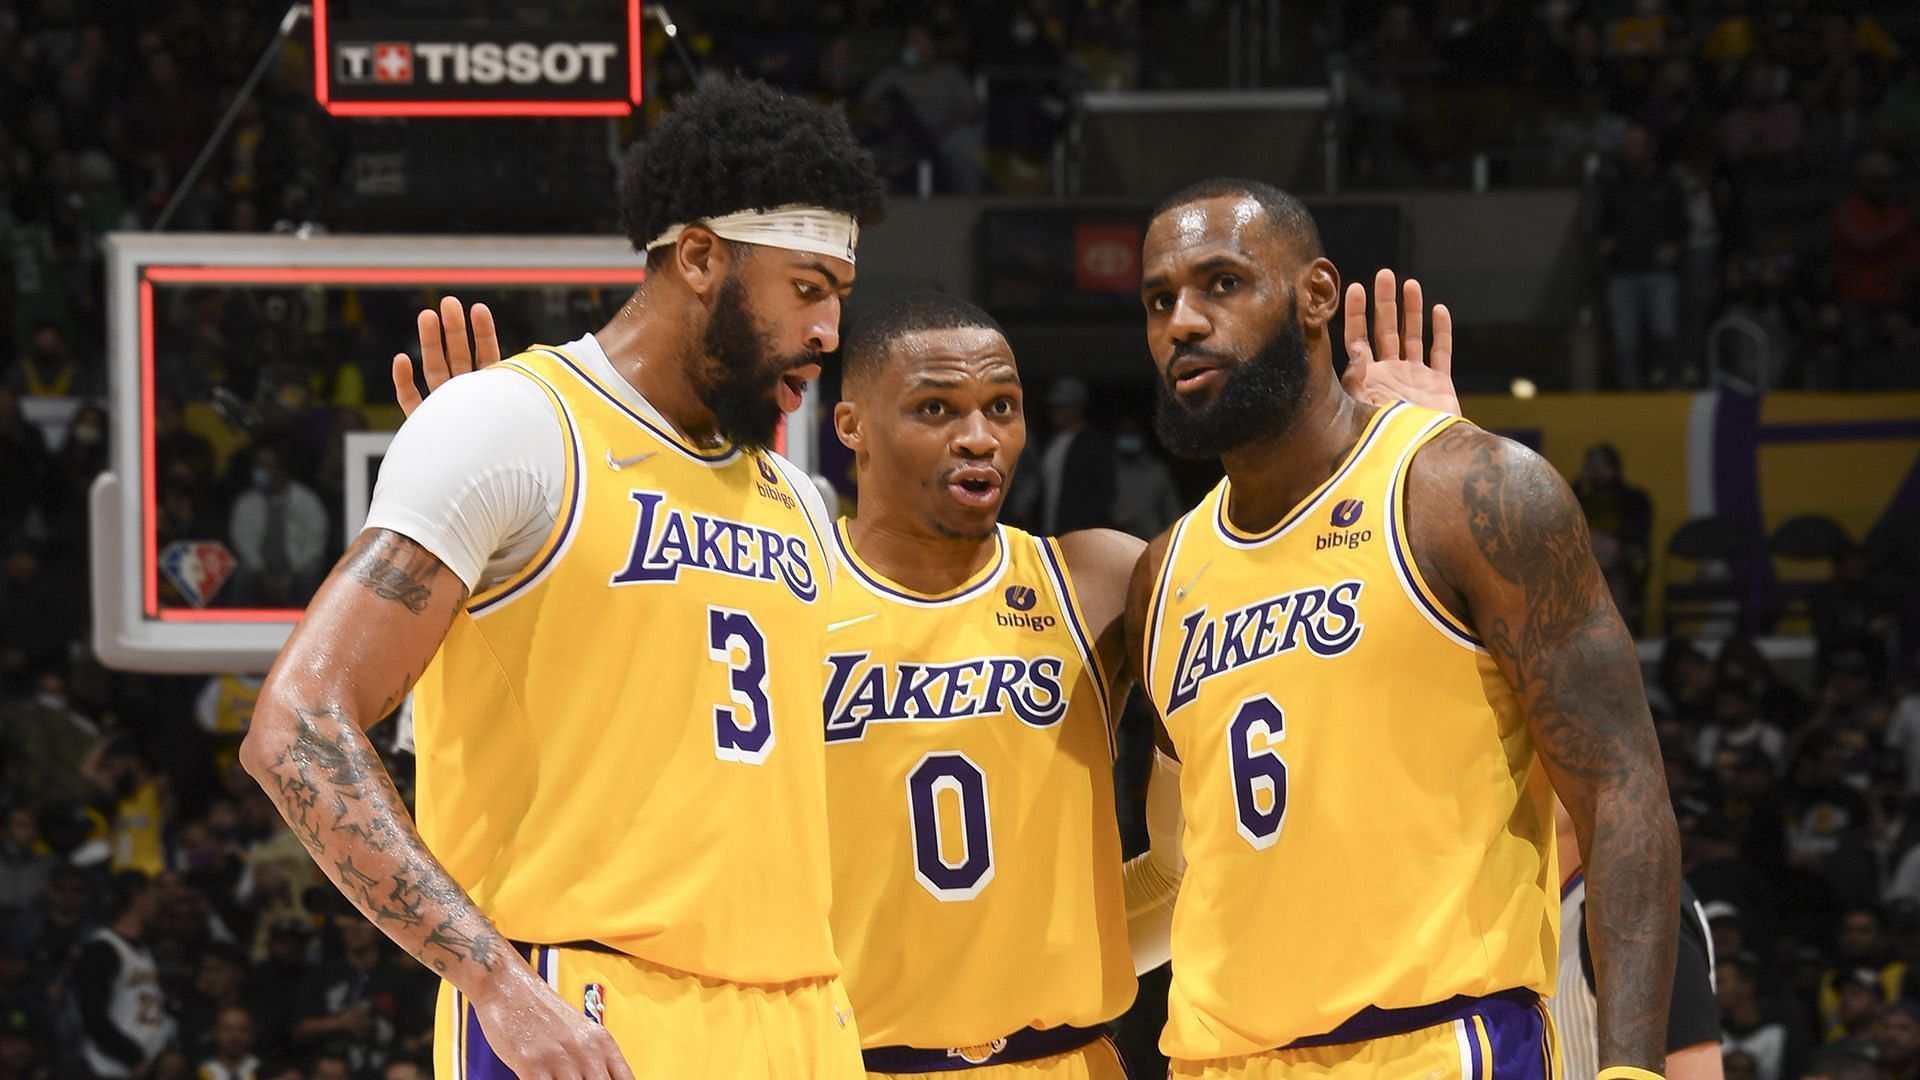 The LA Lakers&#039; Big 3 had their best game of the season against the Boston Celtics in their last game. [Photo: NBA.com]